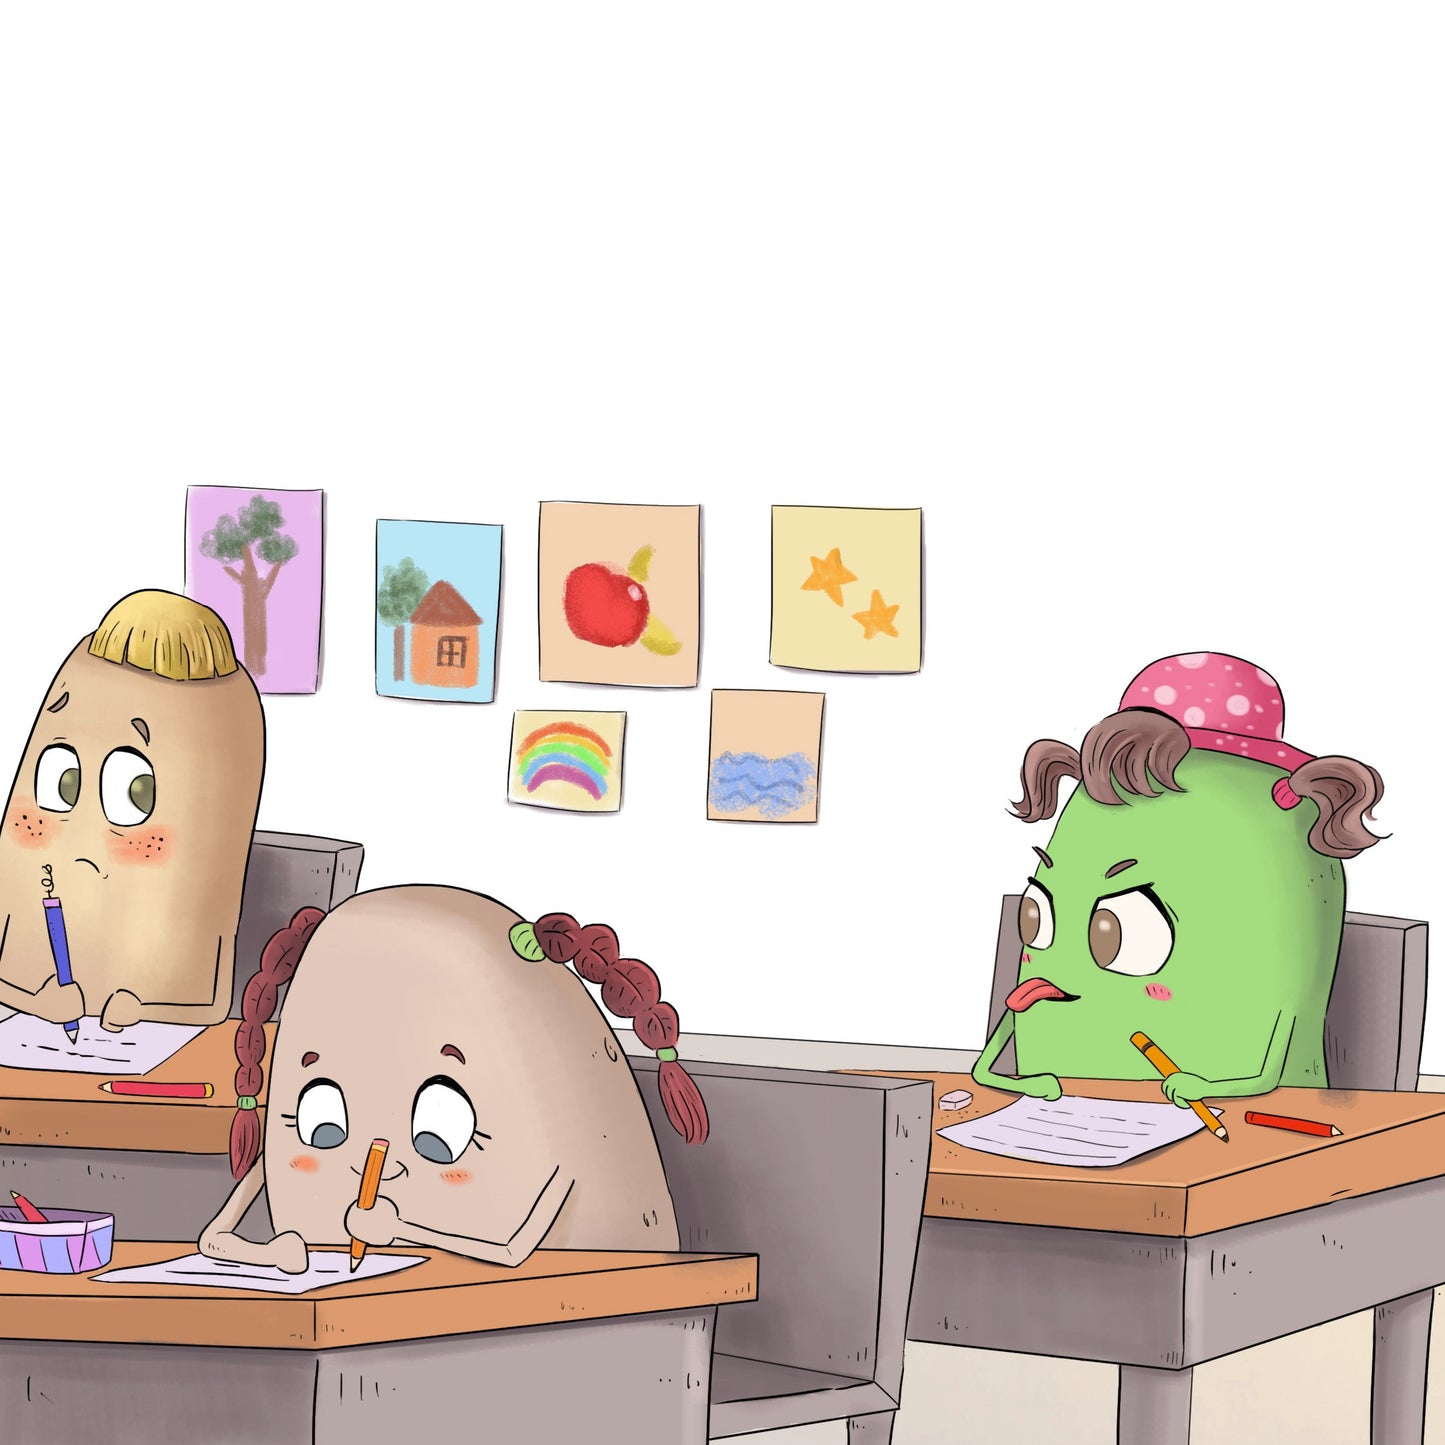 The Mean Bean: A Children's Book About Anger Management, Jealousy, and Bullying